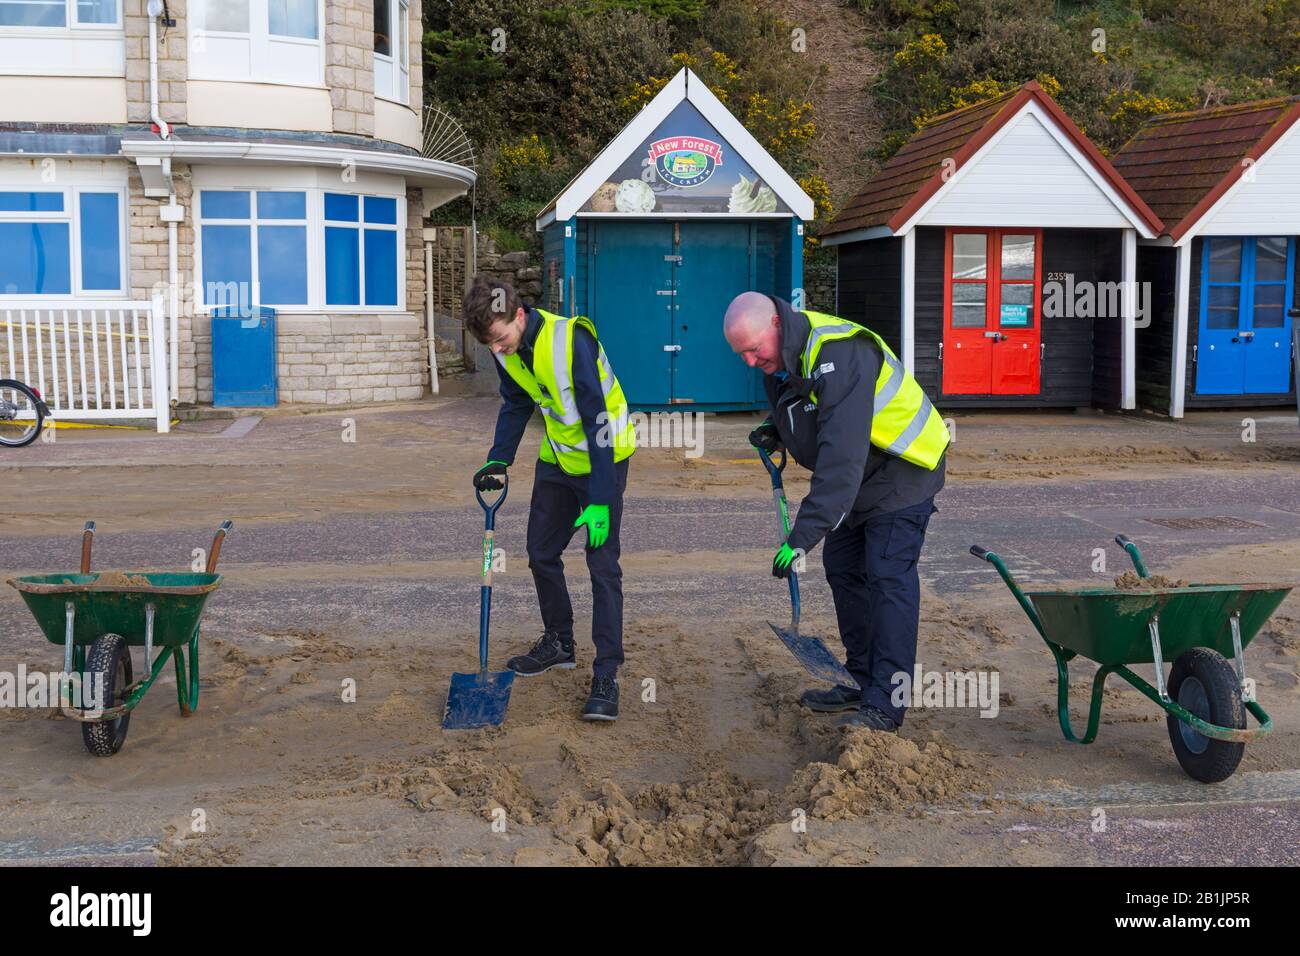 Bournemouth, Dorset, UK. 26th Feb 2020. Councillor Lewis Allison (left), gets stuck in and gives the seafront rangers (Terry, right) a hand to clear the sand from the promenade, blown up from the recent strong winds and Storm Dennis.   Councillor Allison is Labour Councillor for Boscombe West and Portfolio Holder, Cabinet Member, for Tourism, Leisure and Communities at BCP (Bournemouth, Christchurch and Poole) Council.  Credit: Carolyn Jenkins/Alamy Live News Stock Photo